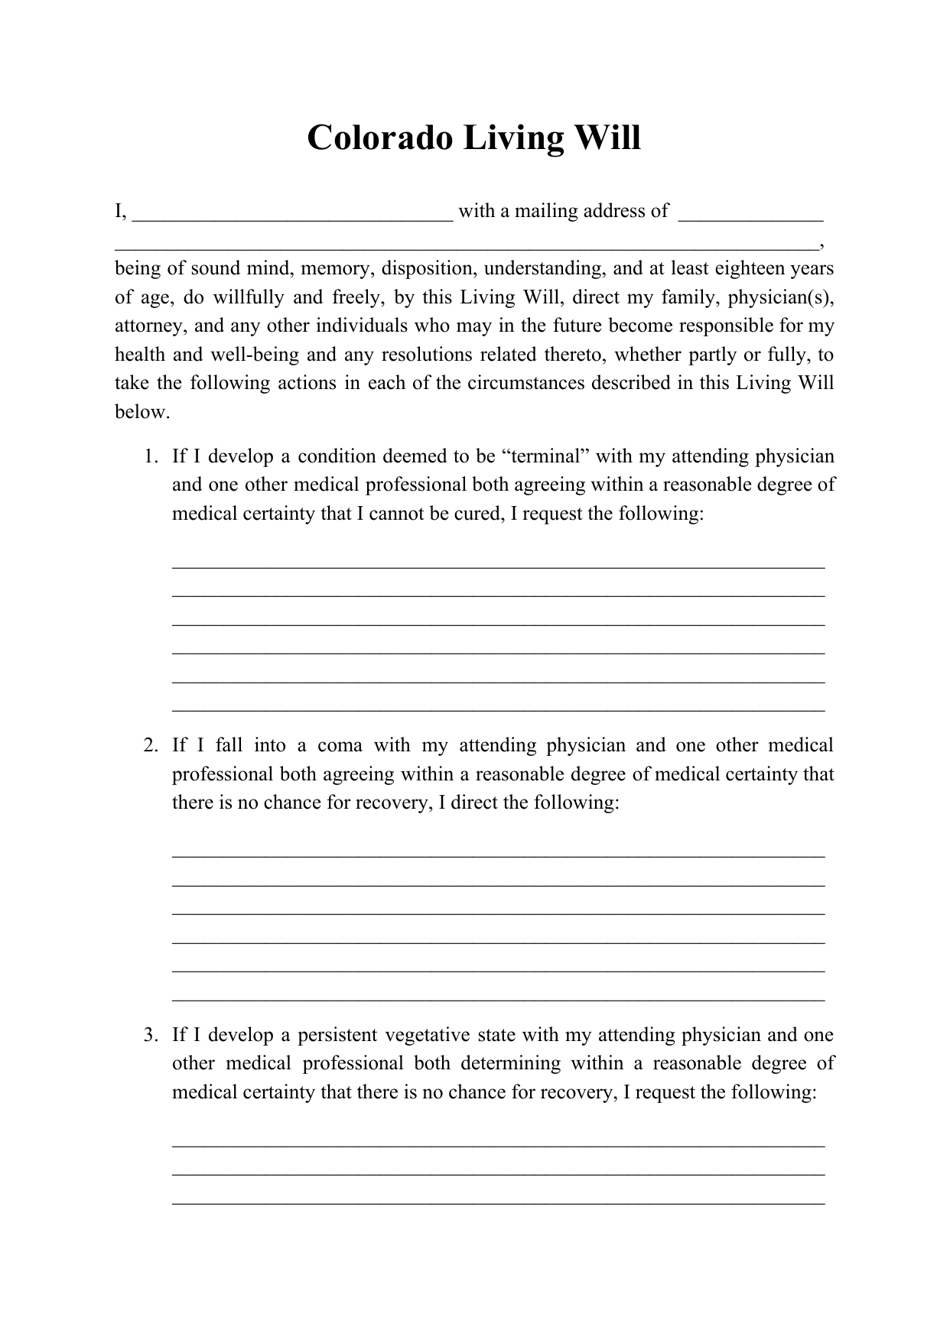 colorado-living-will-form-fill-out-sign-online-and-download-pdf